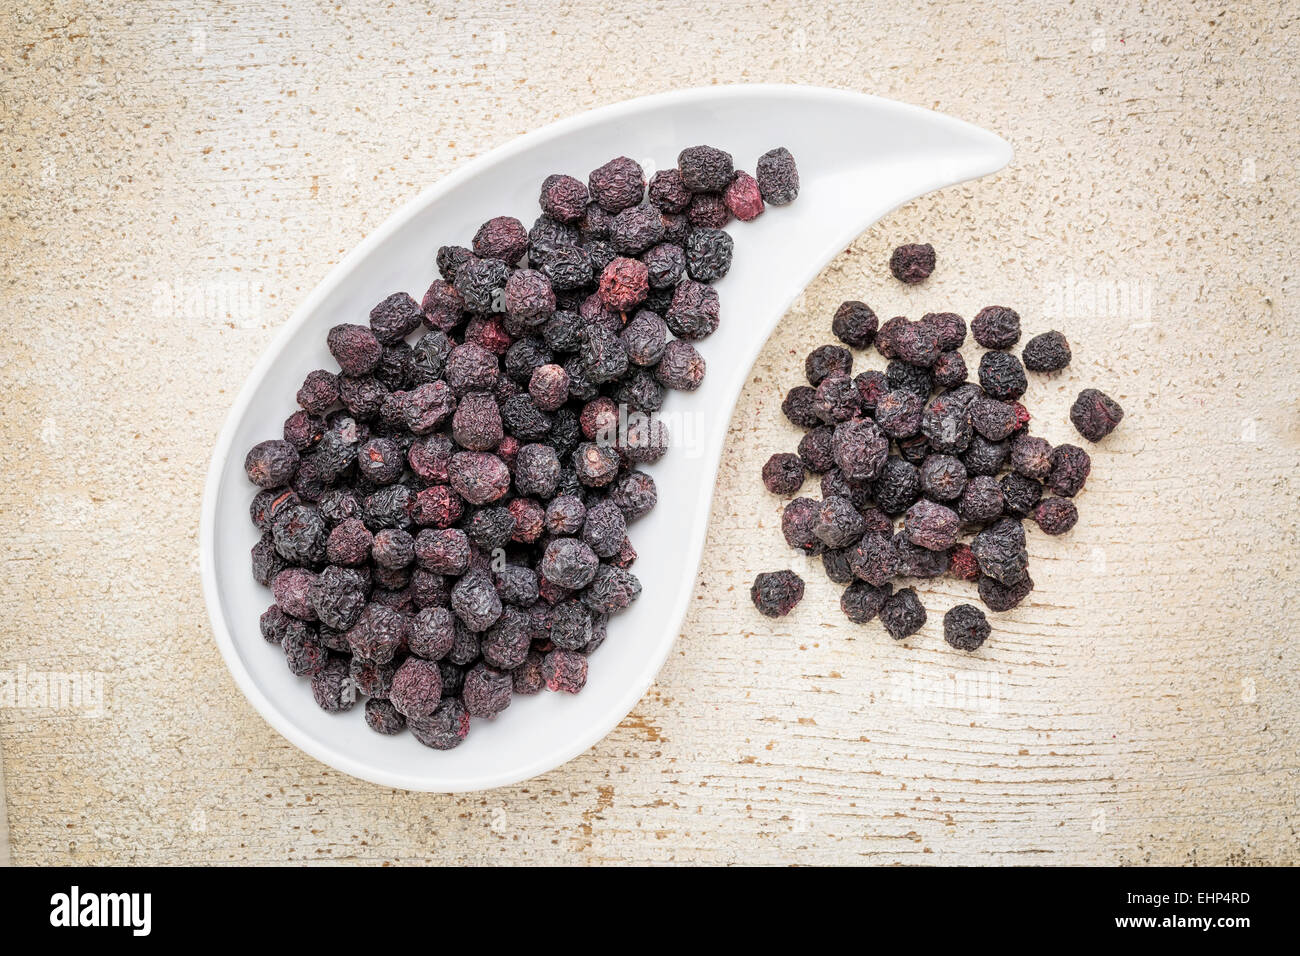 Dried chokeberry (aronia berry) in a teardrop shaped bowl against rustic barn wood Stock Photo